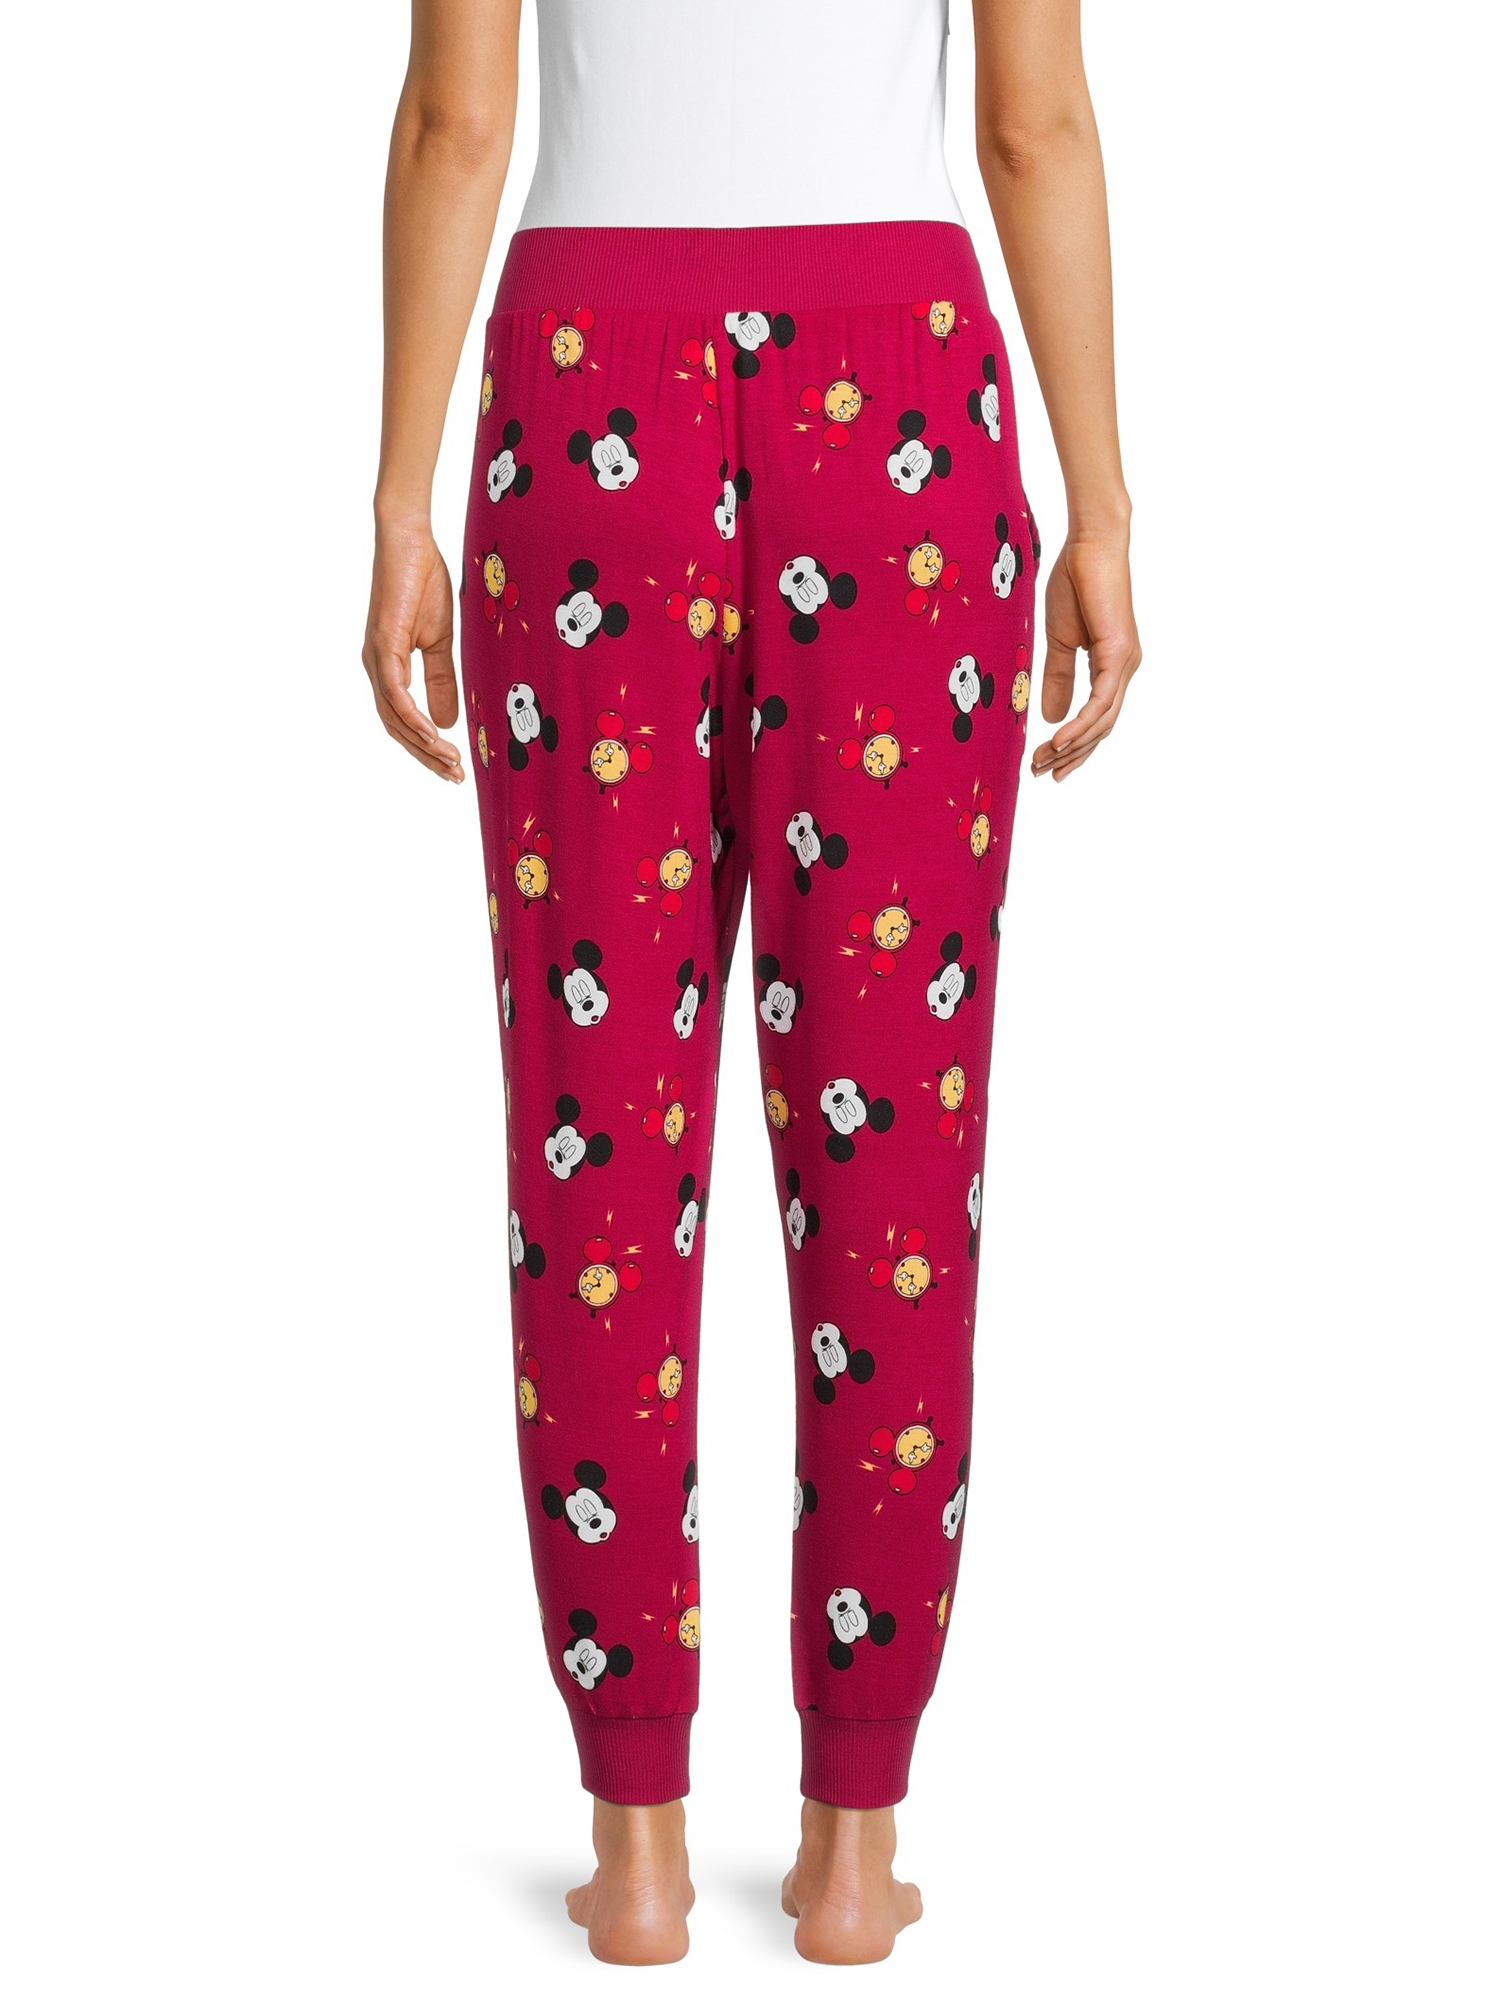 Disney Printed Breathable Easy Care Pajamas (Women's) 1 Pack - image 2 of 7